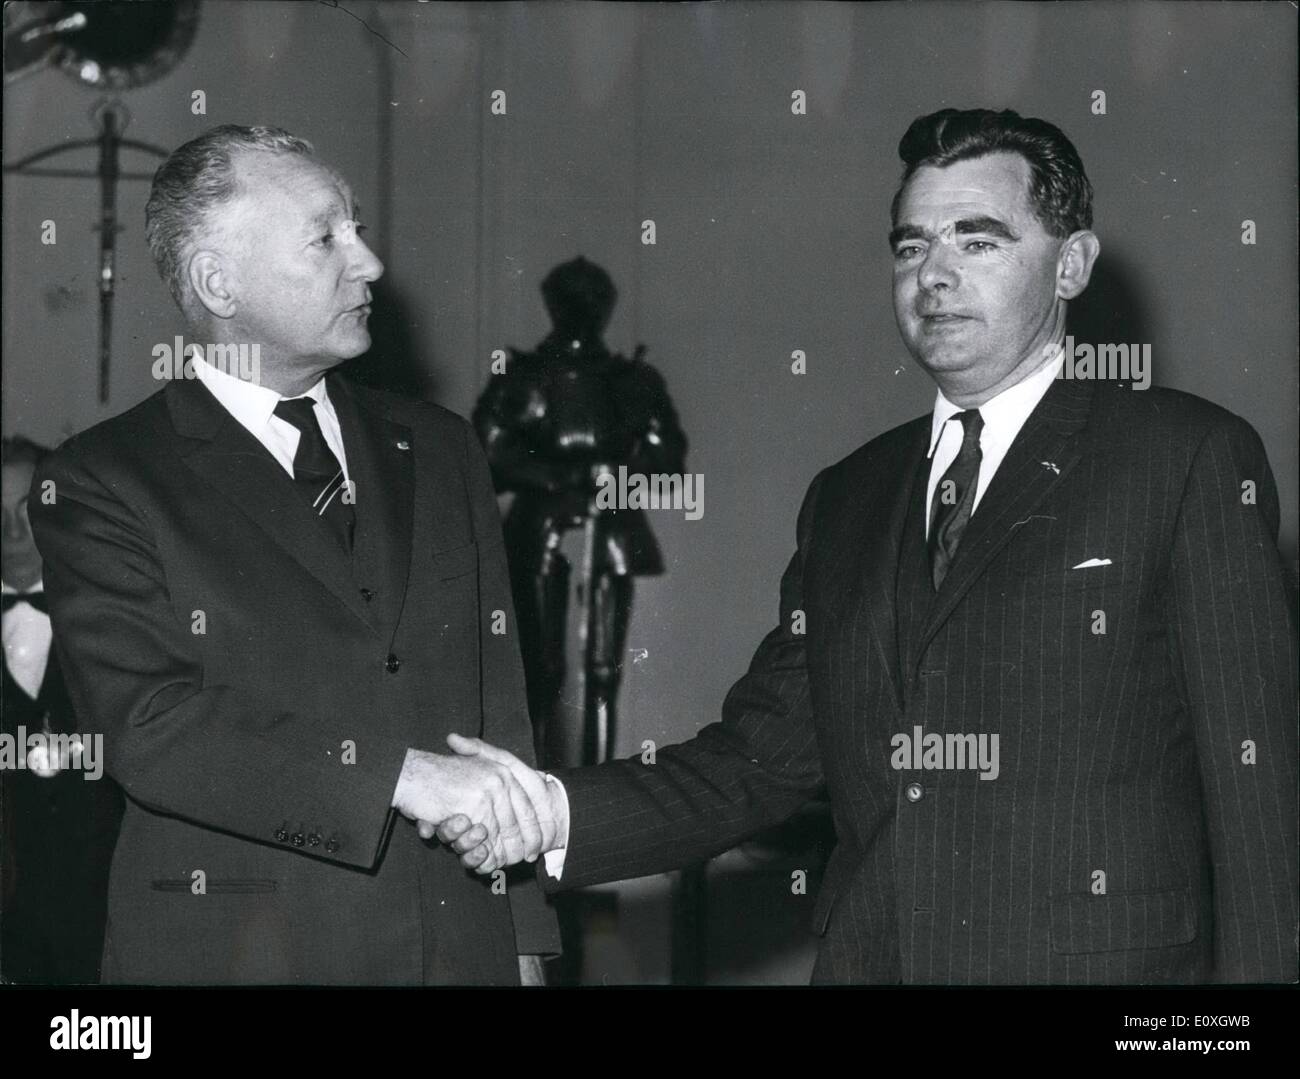 Dec. 12, 1966 - Belgian Defence Minister of Visit to Paris: Belgian Defence Minister M. Poswick who is now in Paris was received by M. Messmer, French Minister of the Armies, this morning. Photo shows M. Poswick (right) shaking hands with M. Messmer. Stock Photo